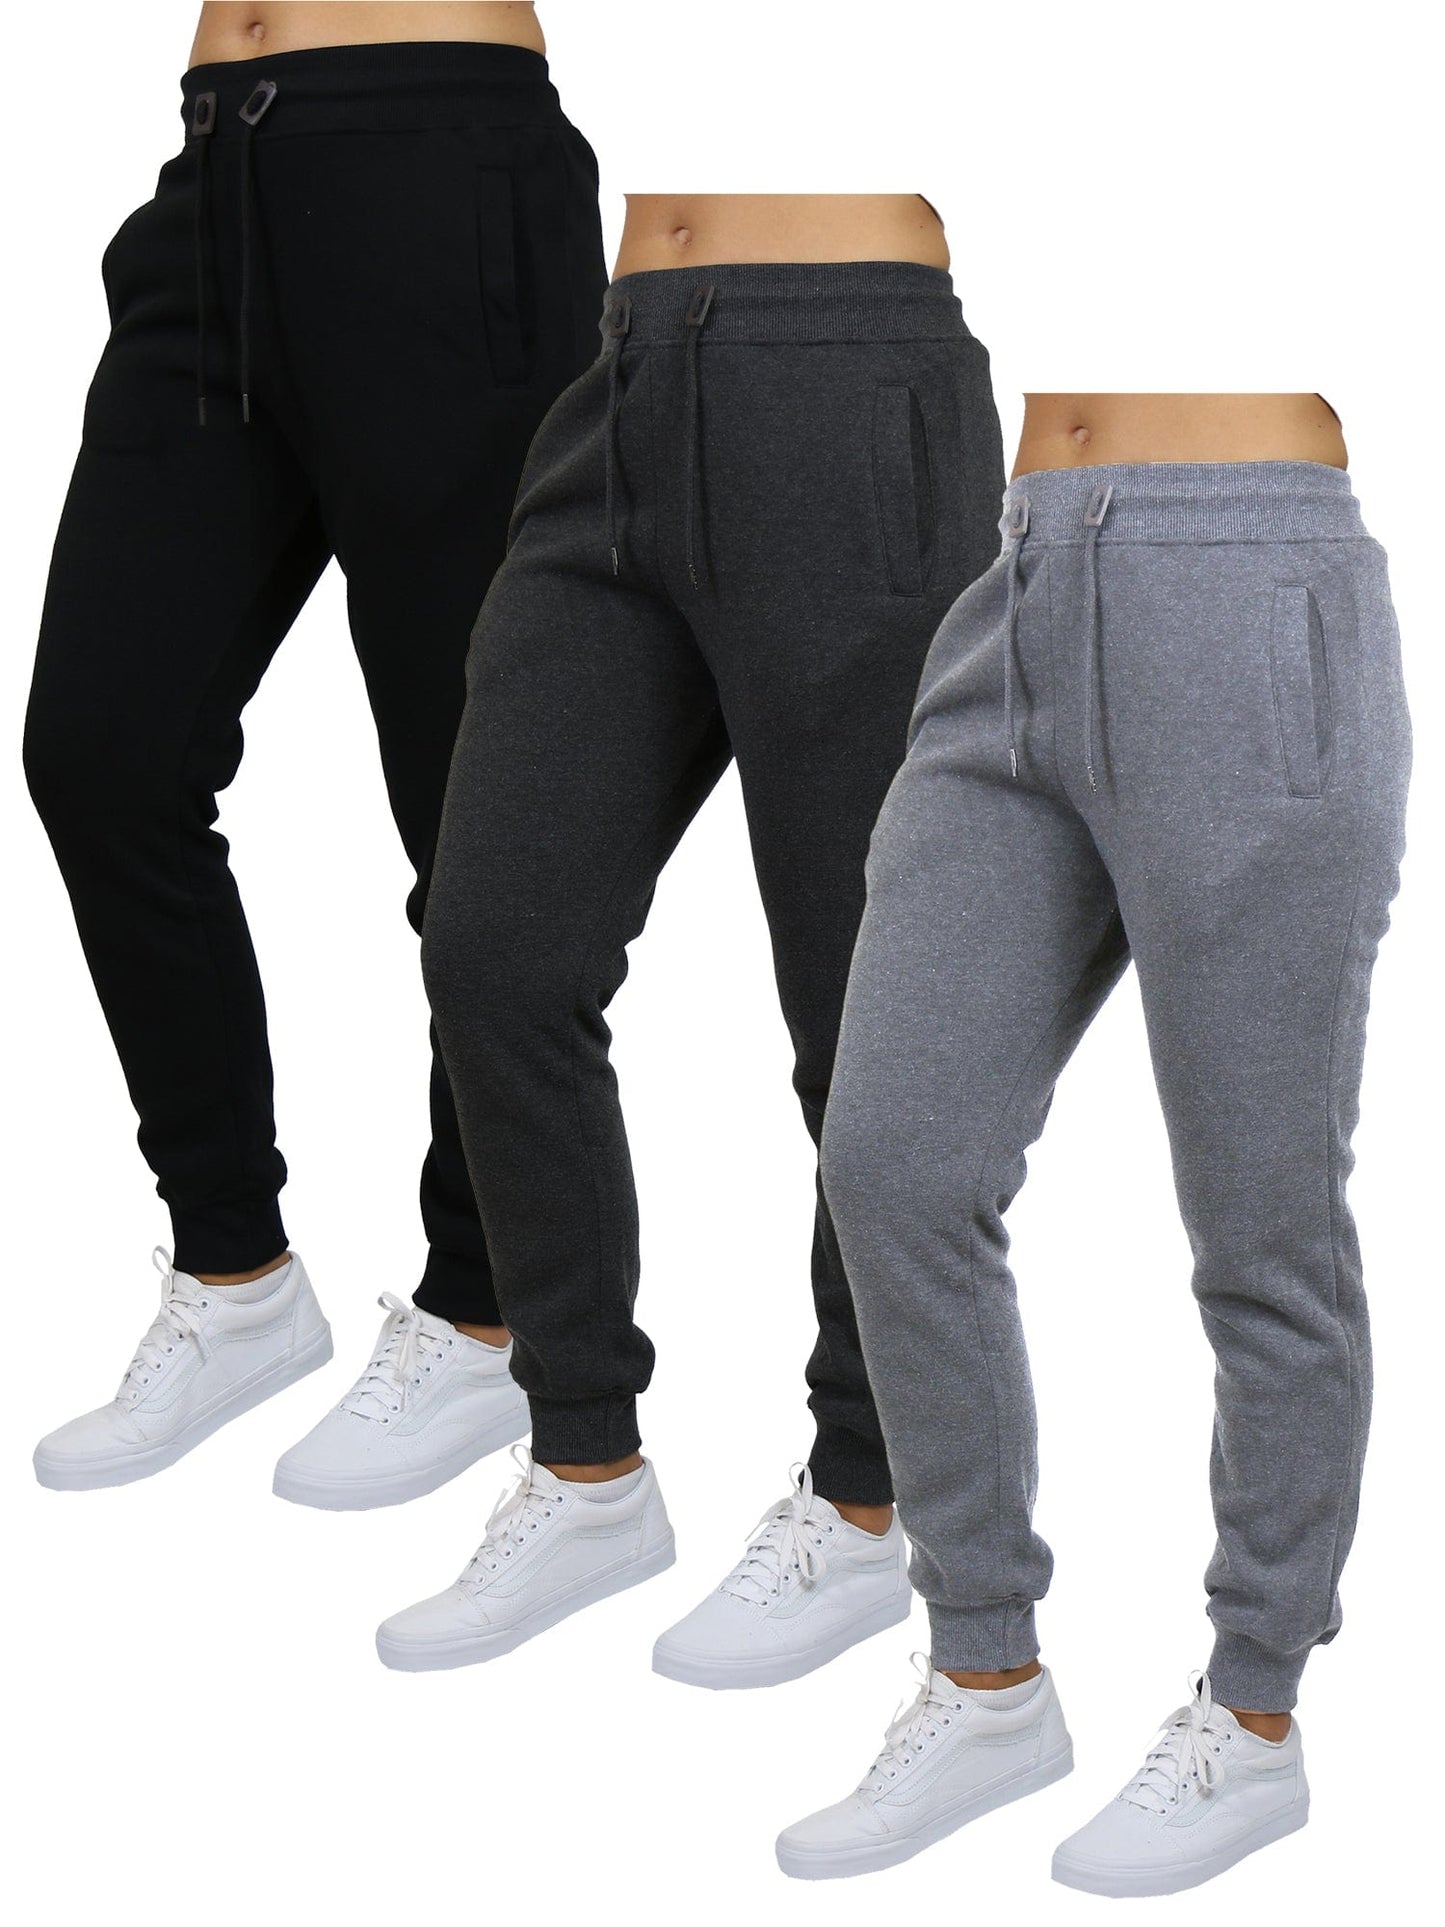 Free 2-day shipping. Buy GBH Womens Loose Fit Fleece Jogger